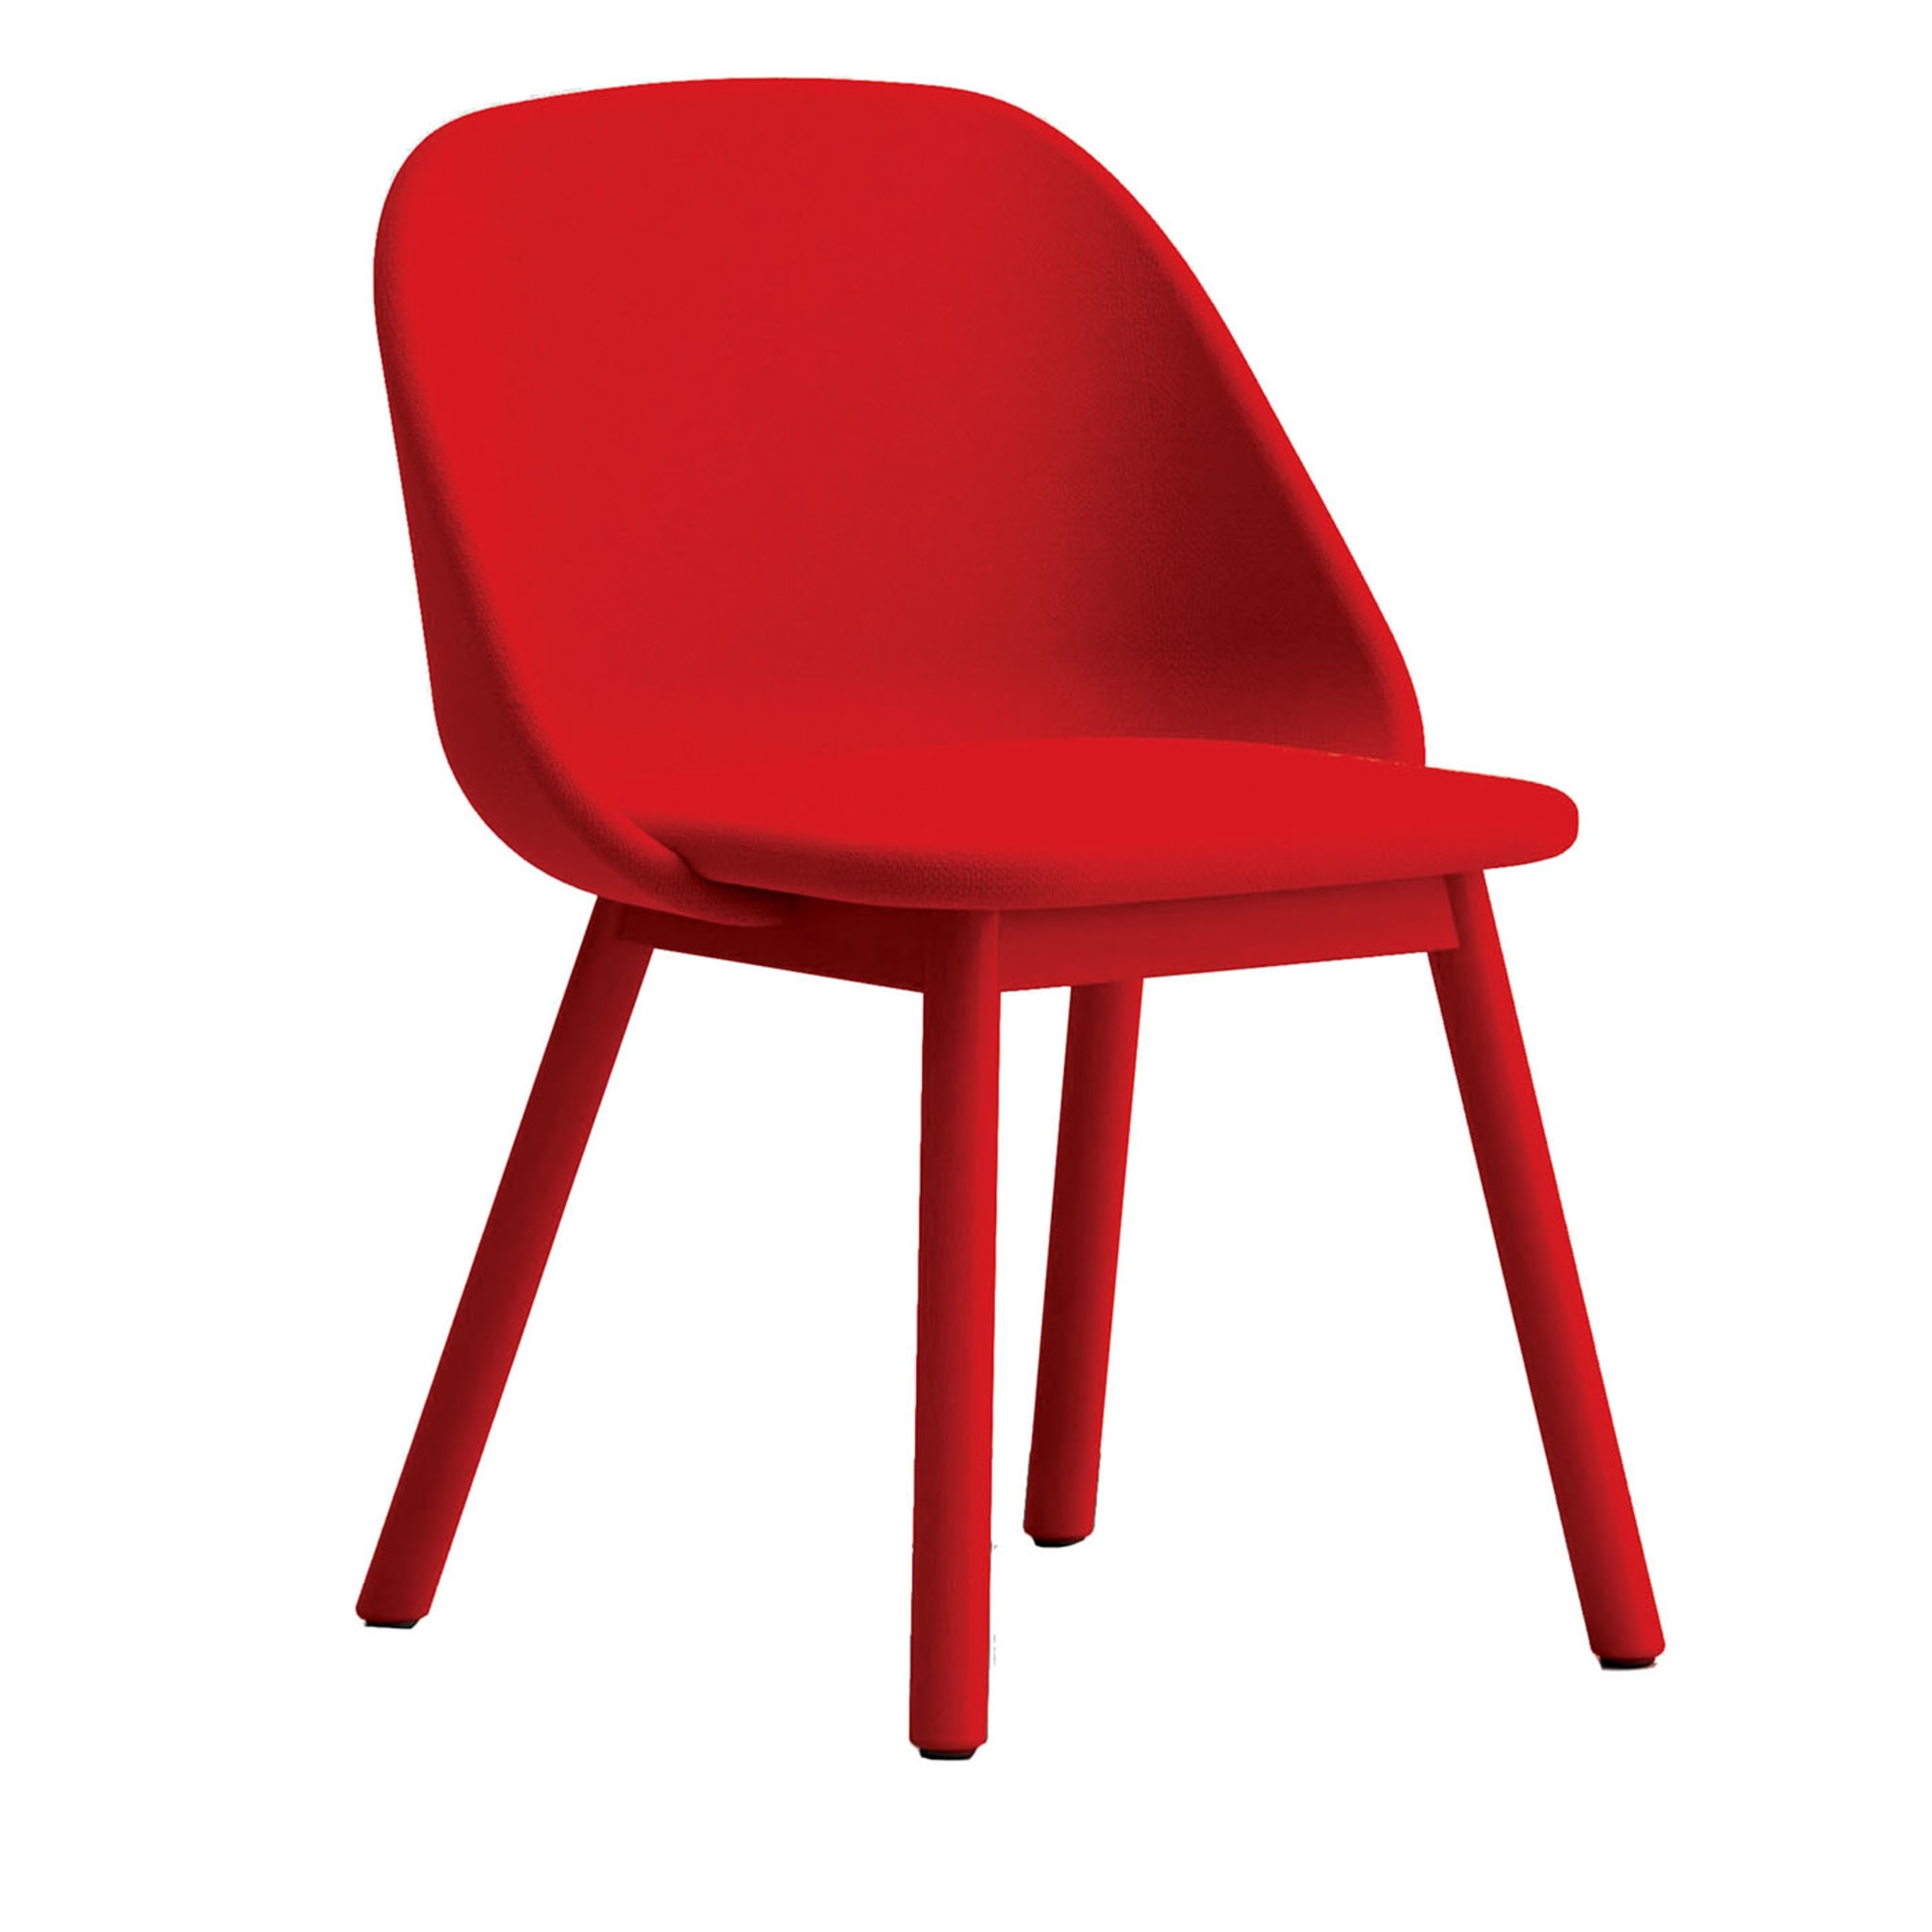 Spoon Red Chair by Studio Pastina - Main view